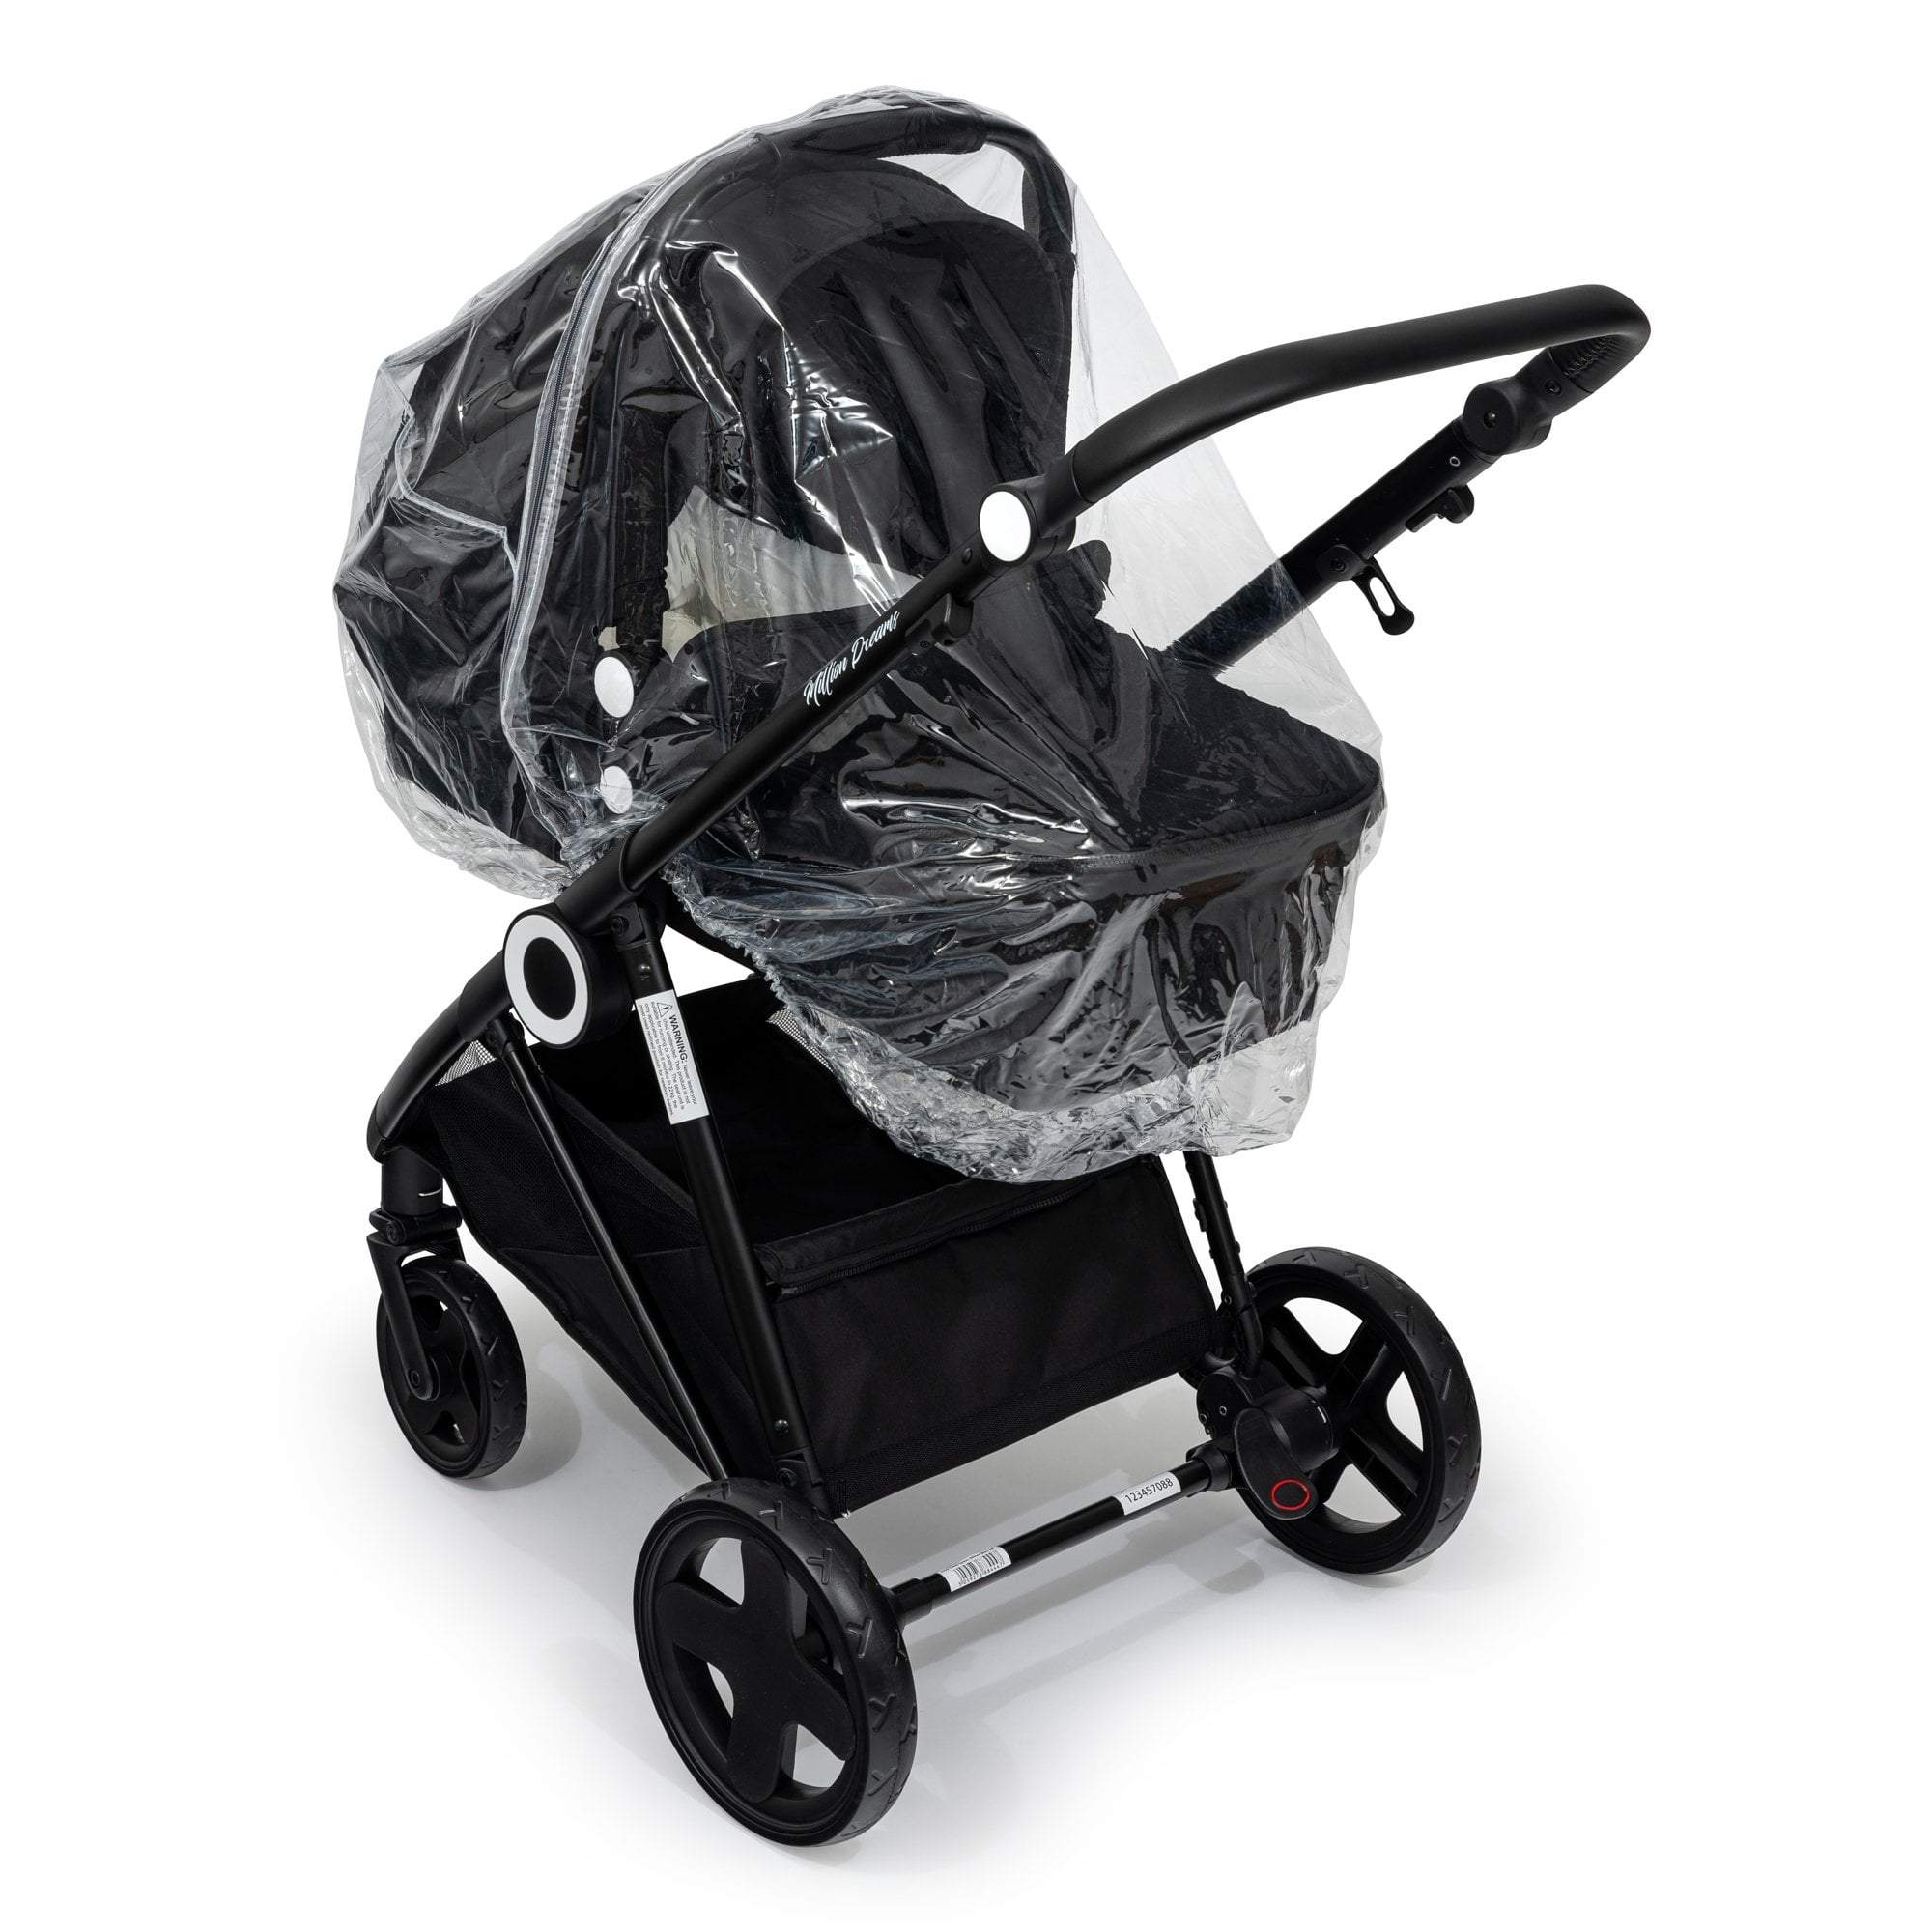 Carrycot Raincover Compatible With Brevi - Fits All Models - For Your Little One